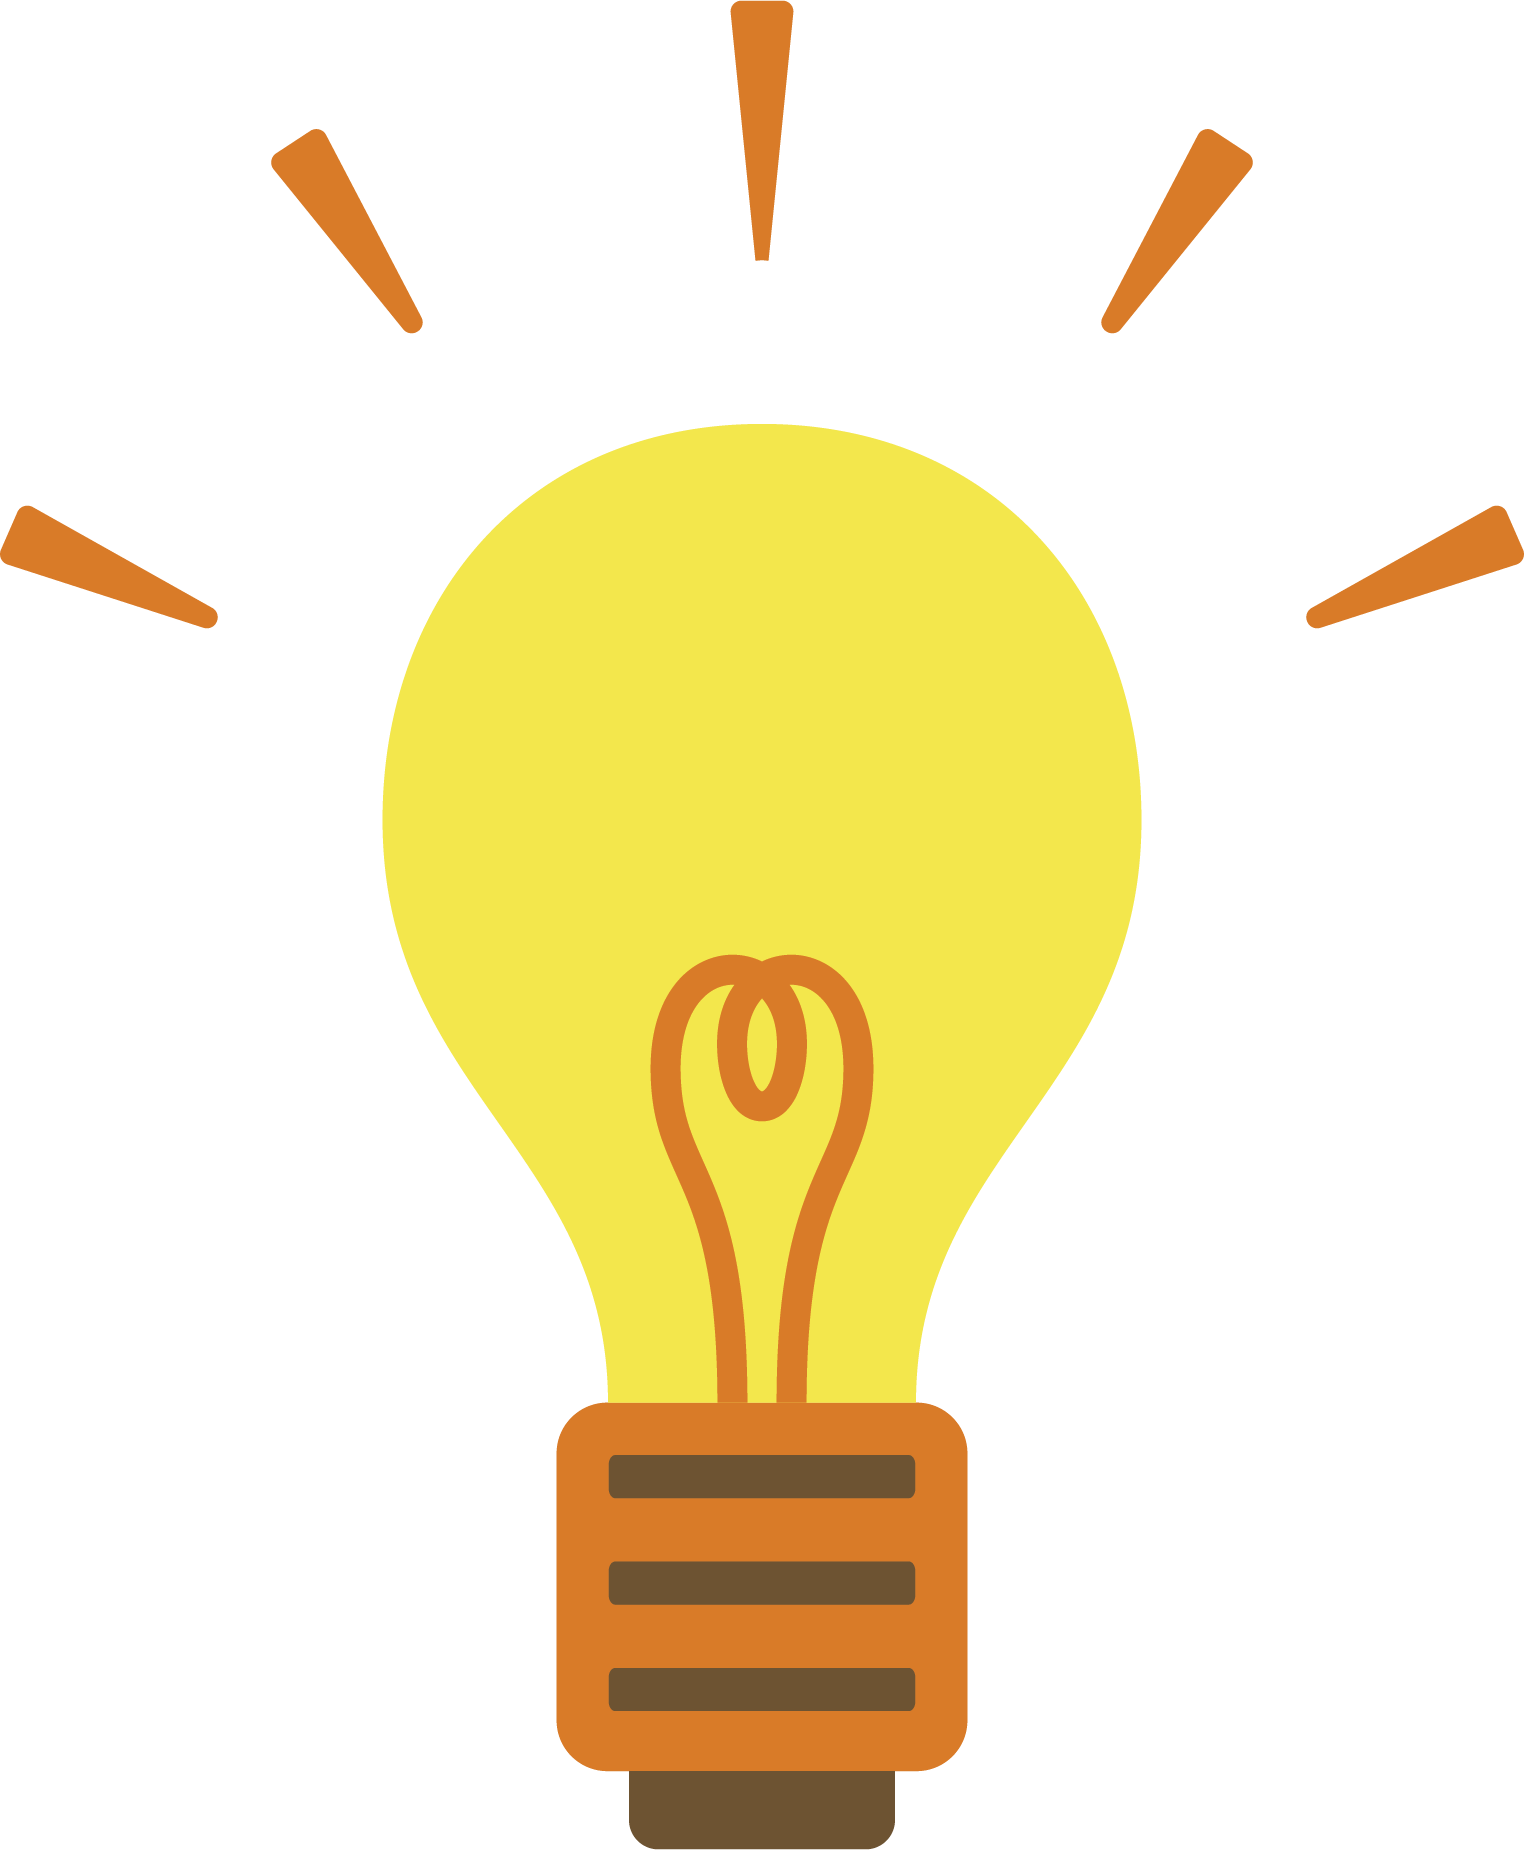 Animated lightbulb that is yellow to show that it is turned on.